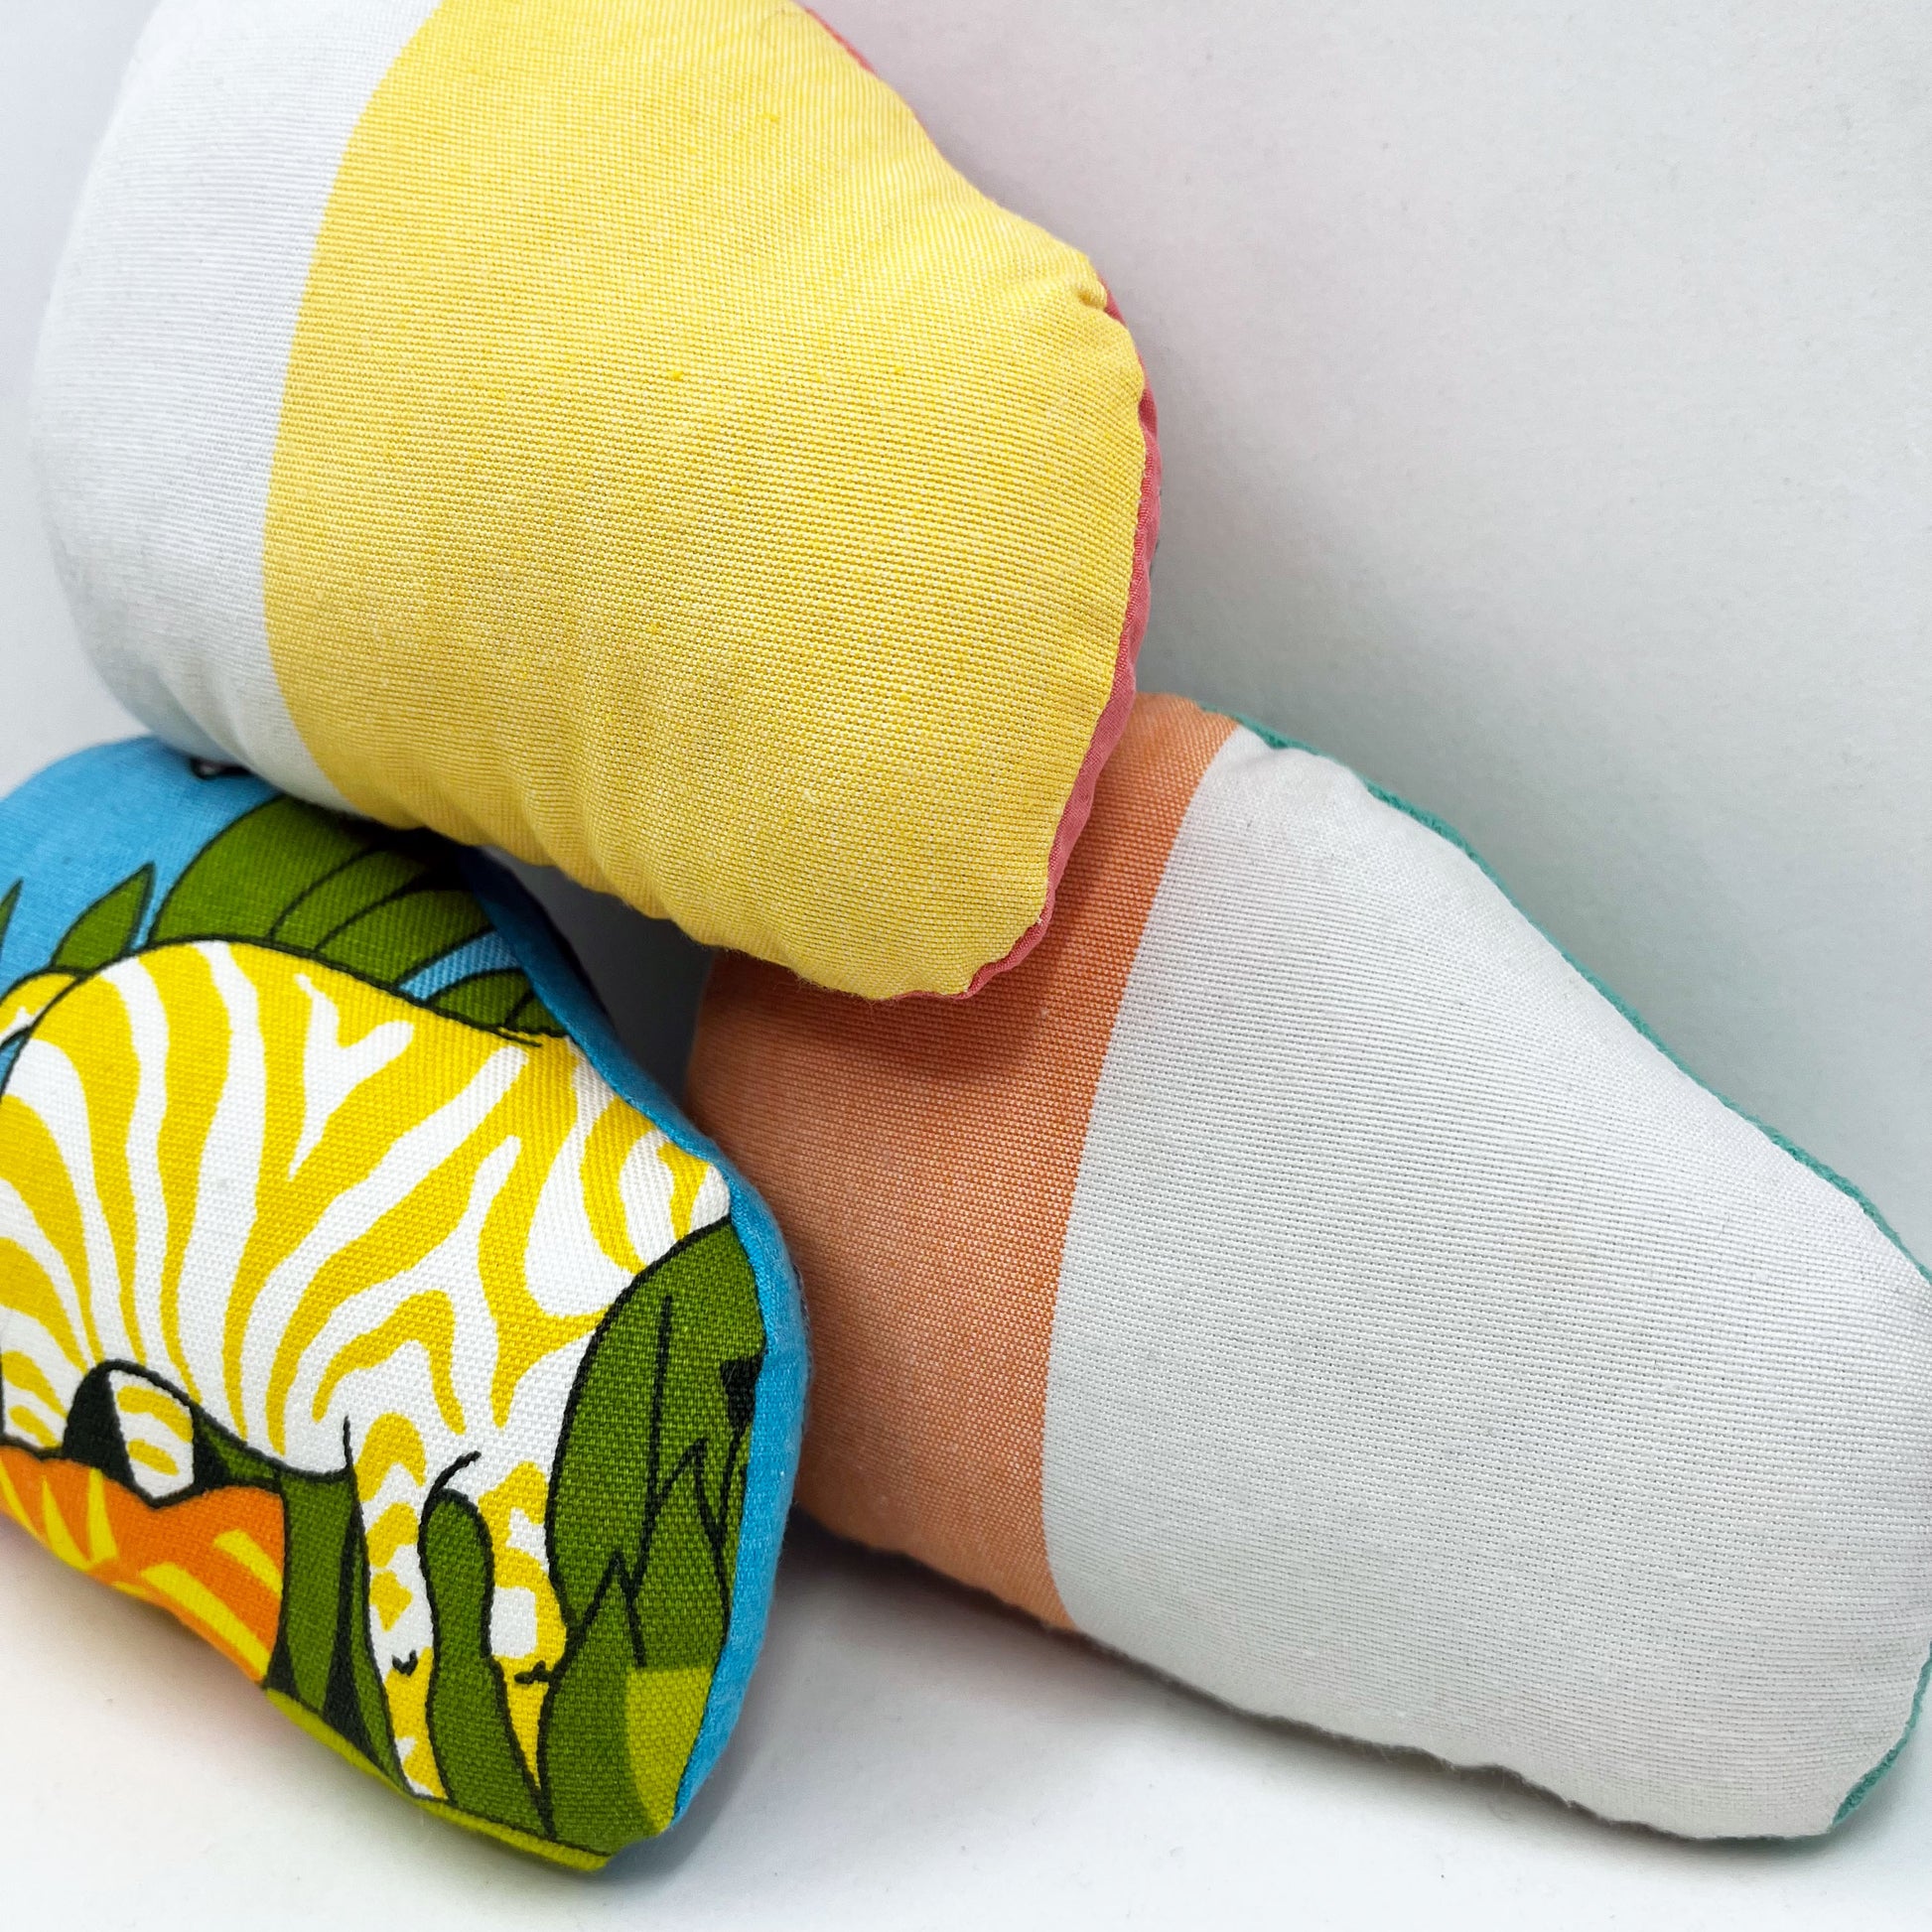 the back sides of a group of colorfully hand embroidered snail stuffed animal pillows in blue, aqua and coral fabric, in a pile on a white background